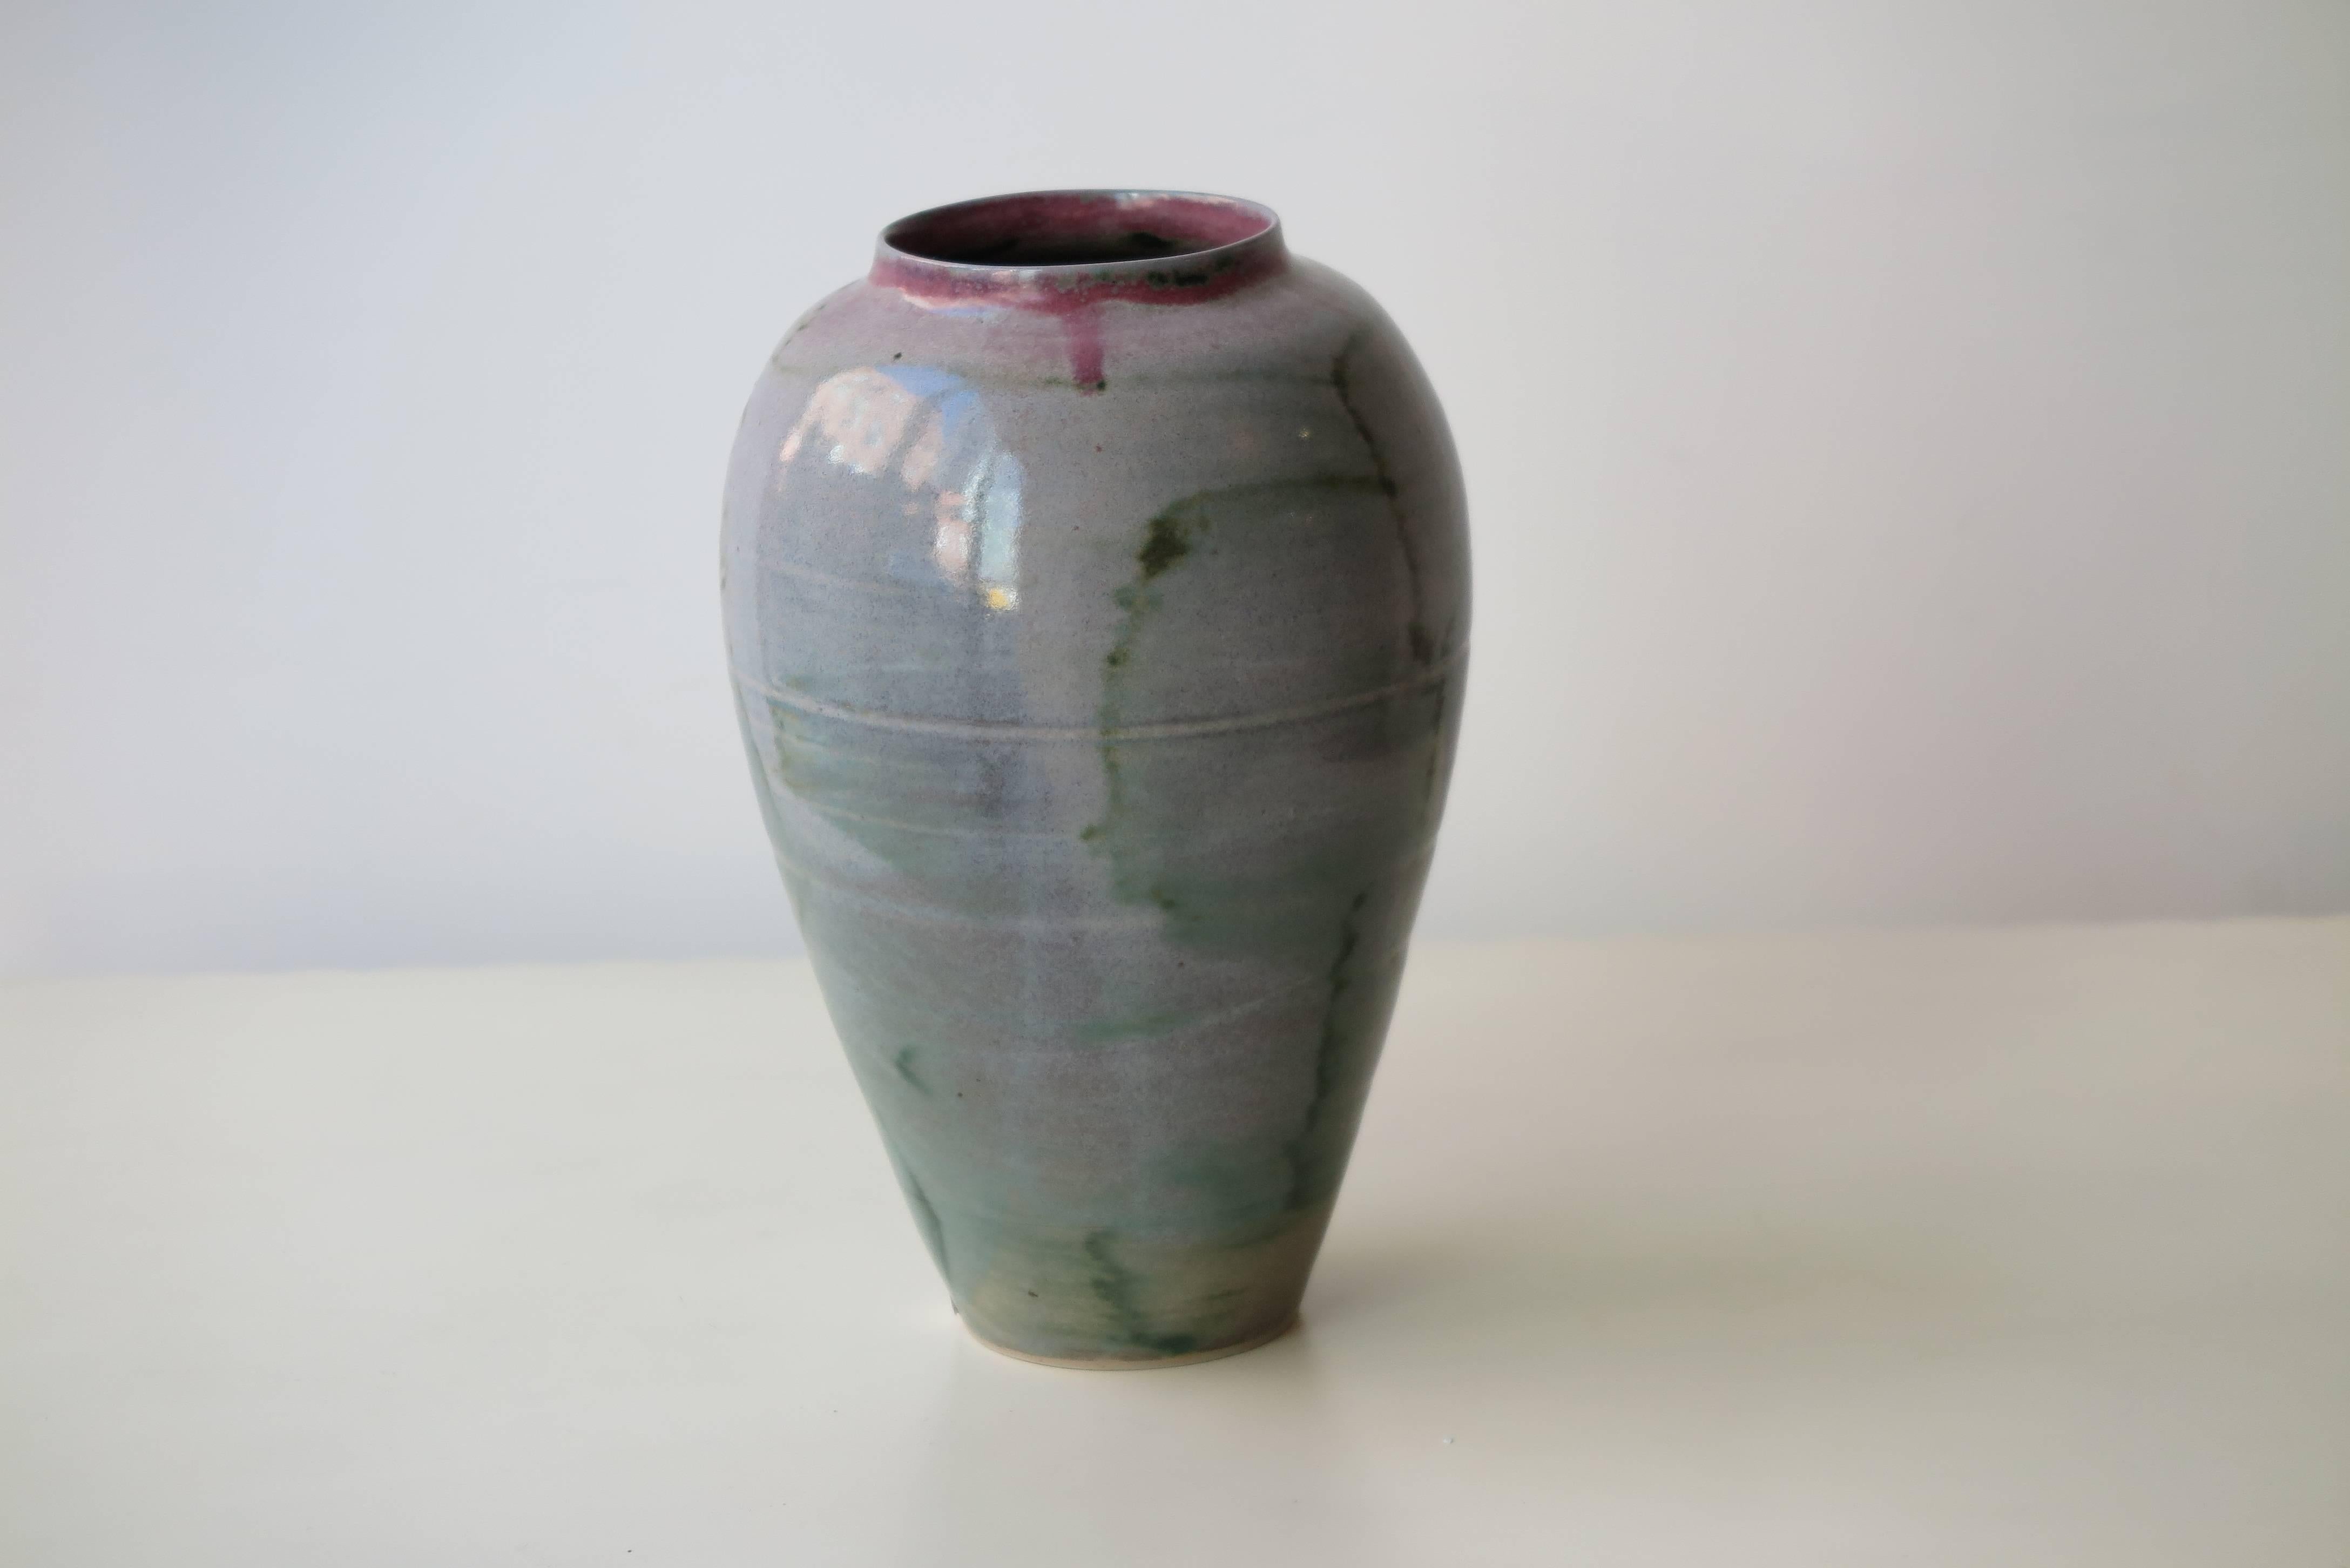 Collection of glazed ceramic vases in green shades by Christiane Perrochon, Tuscany, 2015.
Christiane Perrochon, acclaimed ceramic artist from Tuscany, creates only unique and one of a kind objects and pieces. She is world known for her artistic